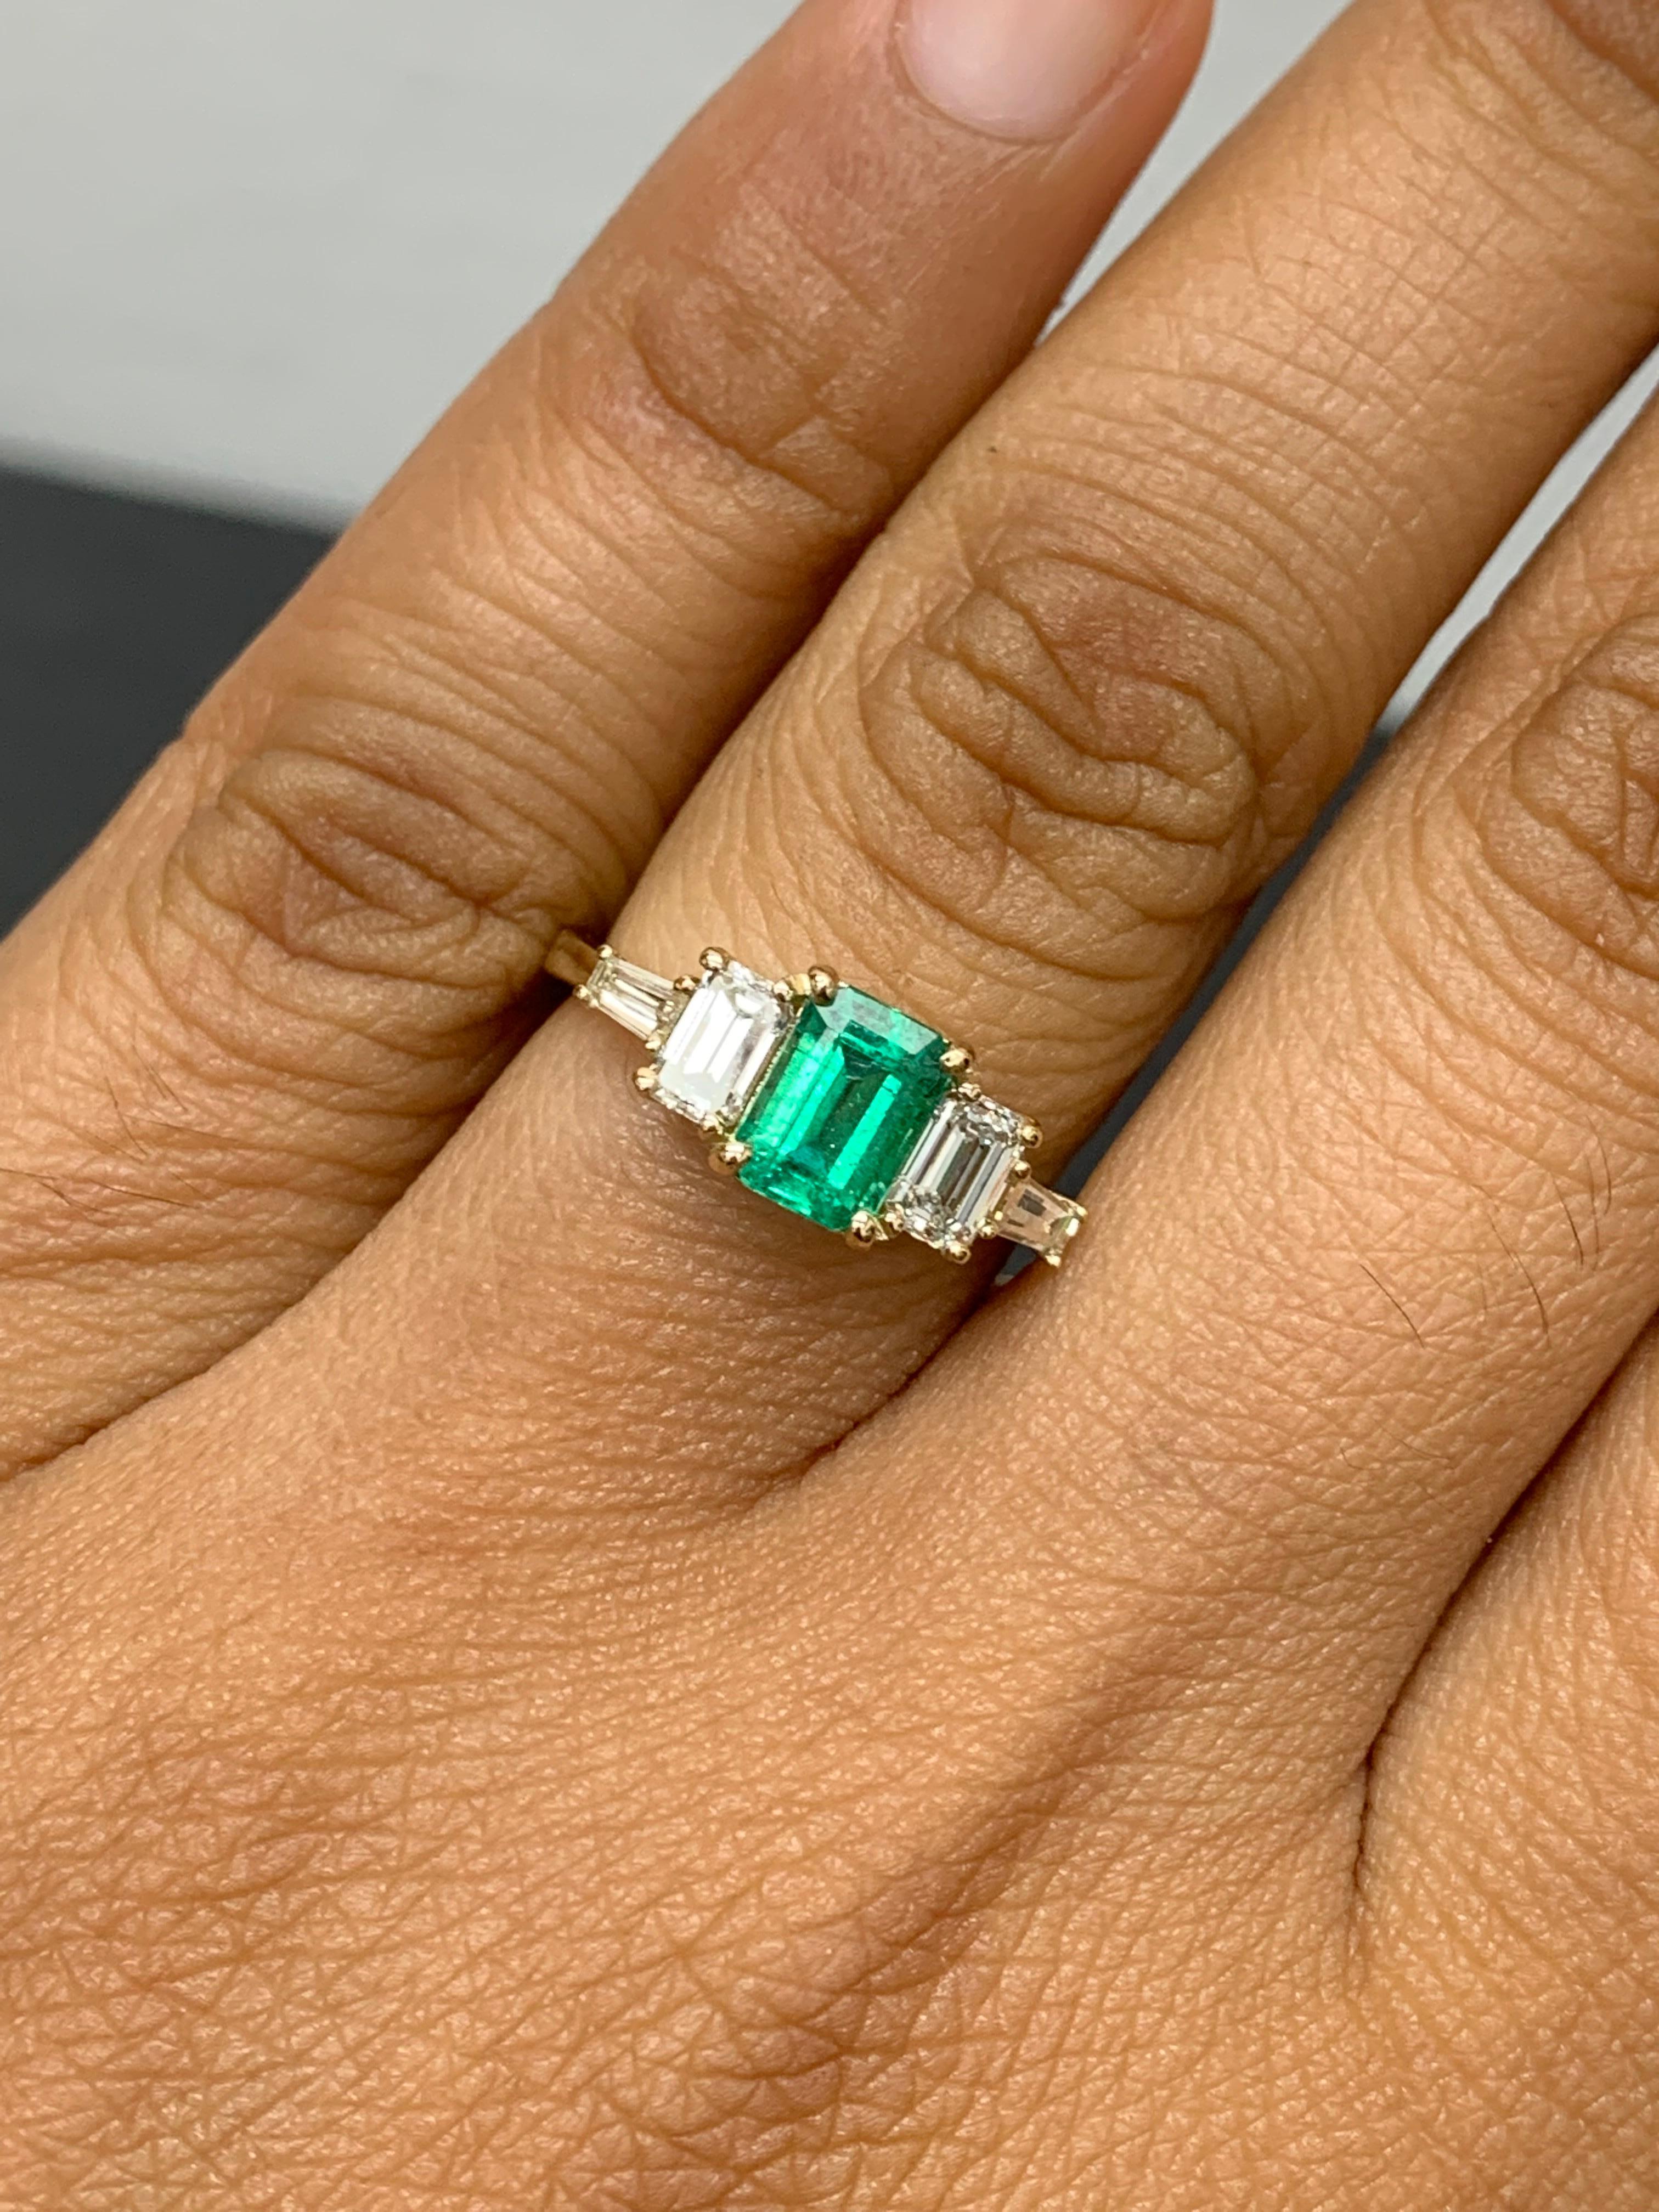 A stunning ring showcasing a rich intense emerald cut lush green emerald weighing 0.72 carats.  Flanking the center stone are two emerald-cut diamonds weighing 0.64 carats and two baguette diamonds on each side weighing 0.21 carats in total, Made in